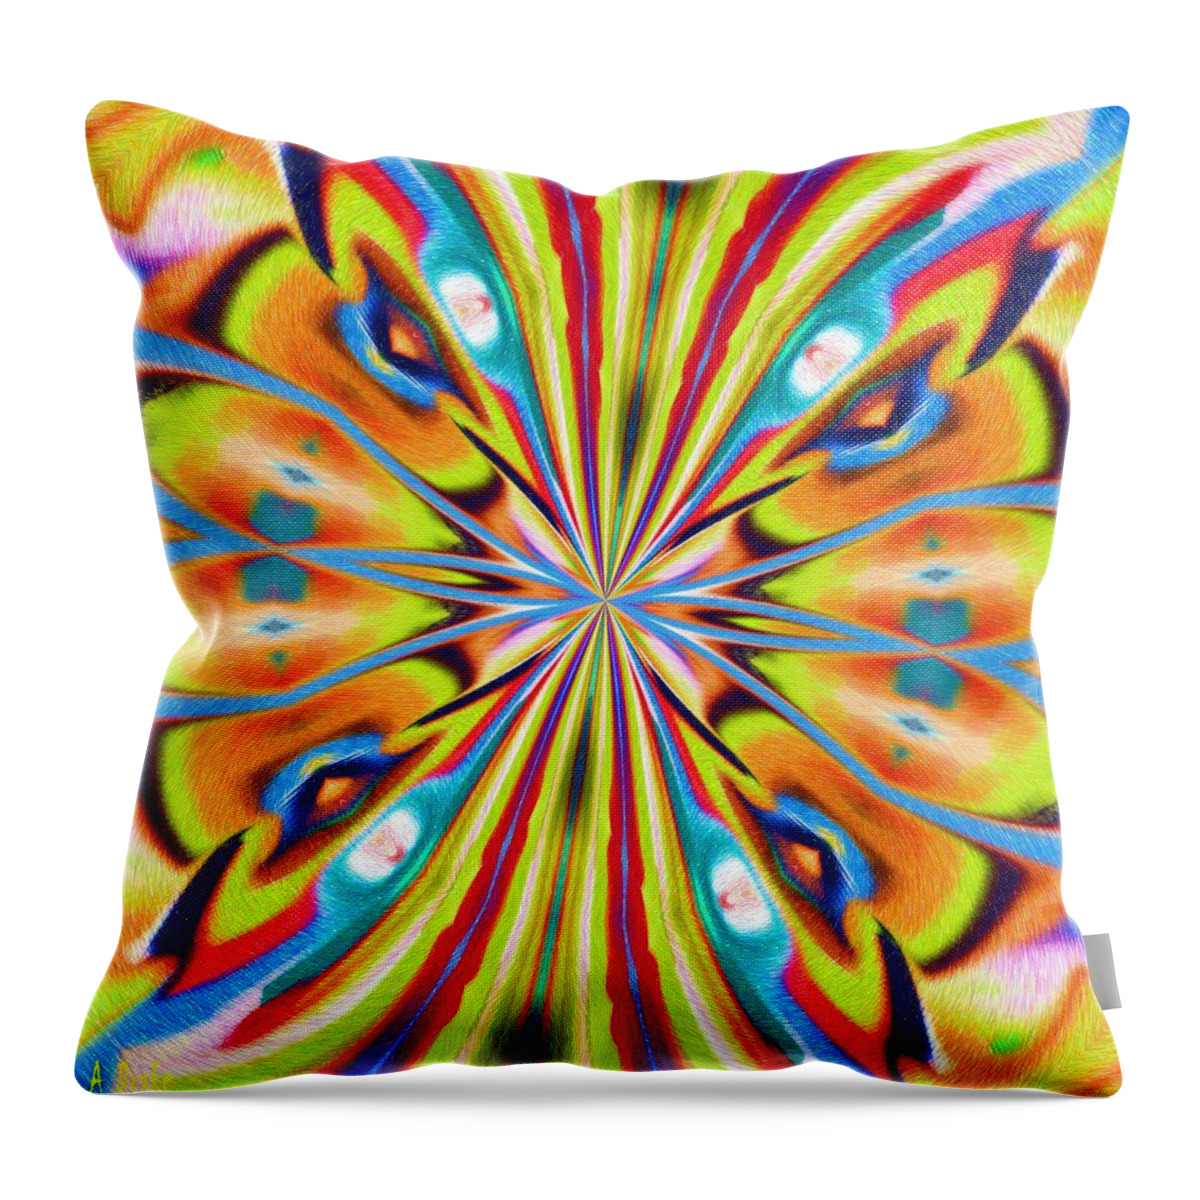 Butterfly Throw Pillow featuring the digital art The Butterfly Effect by Alec Drake